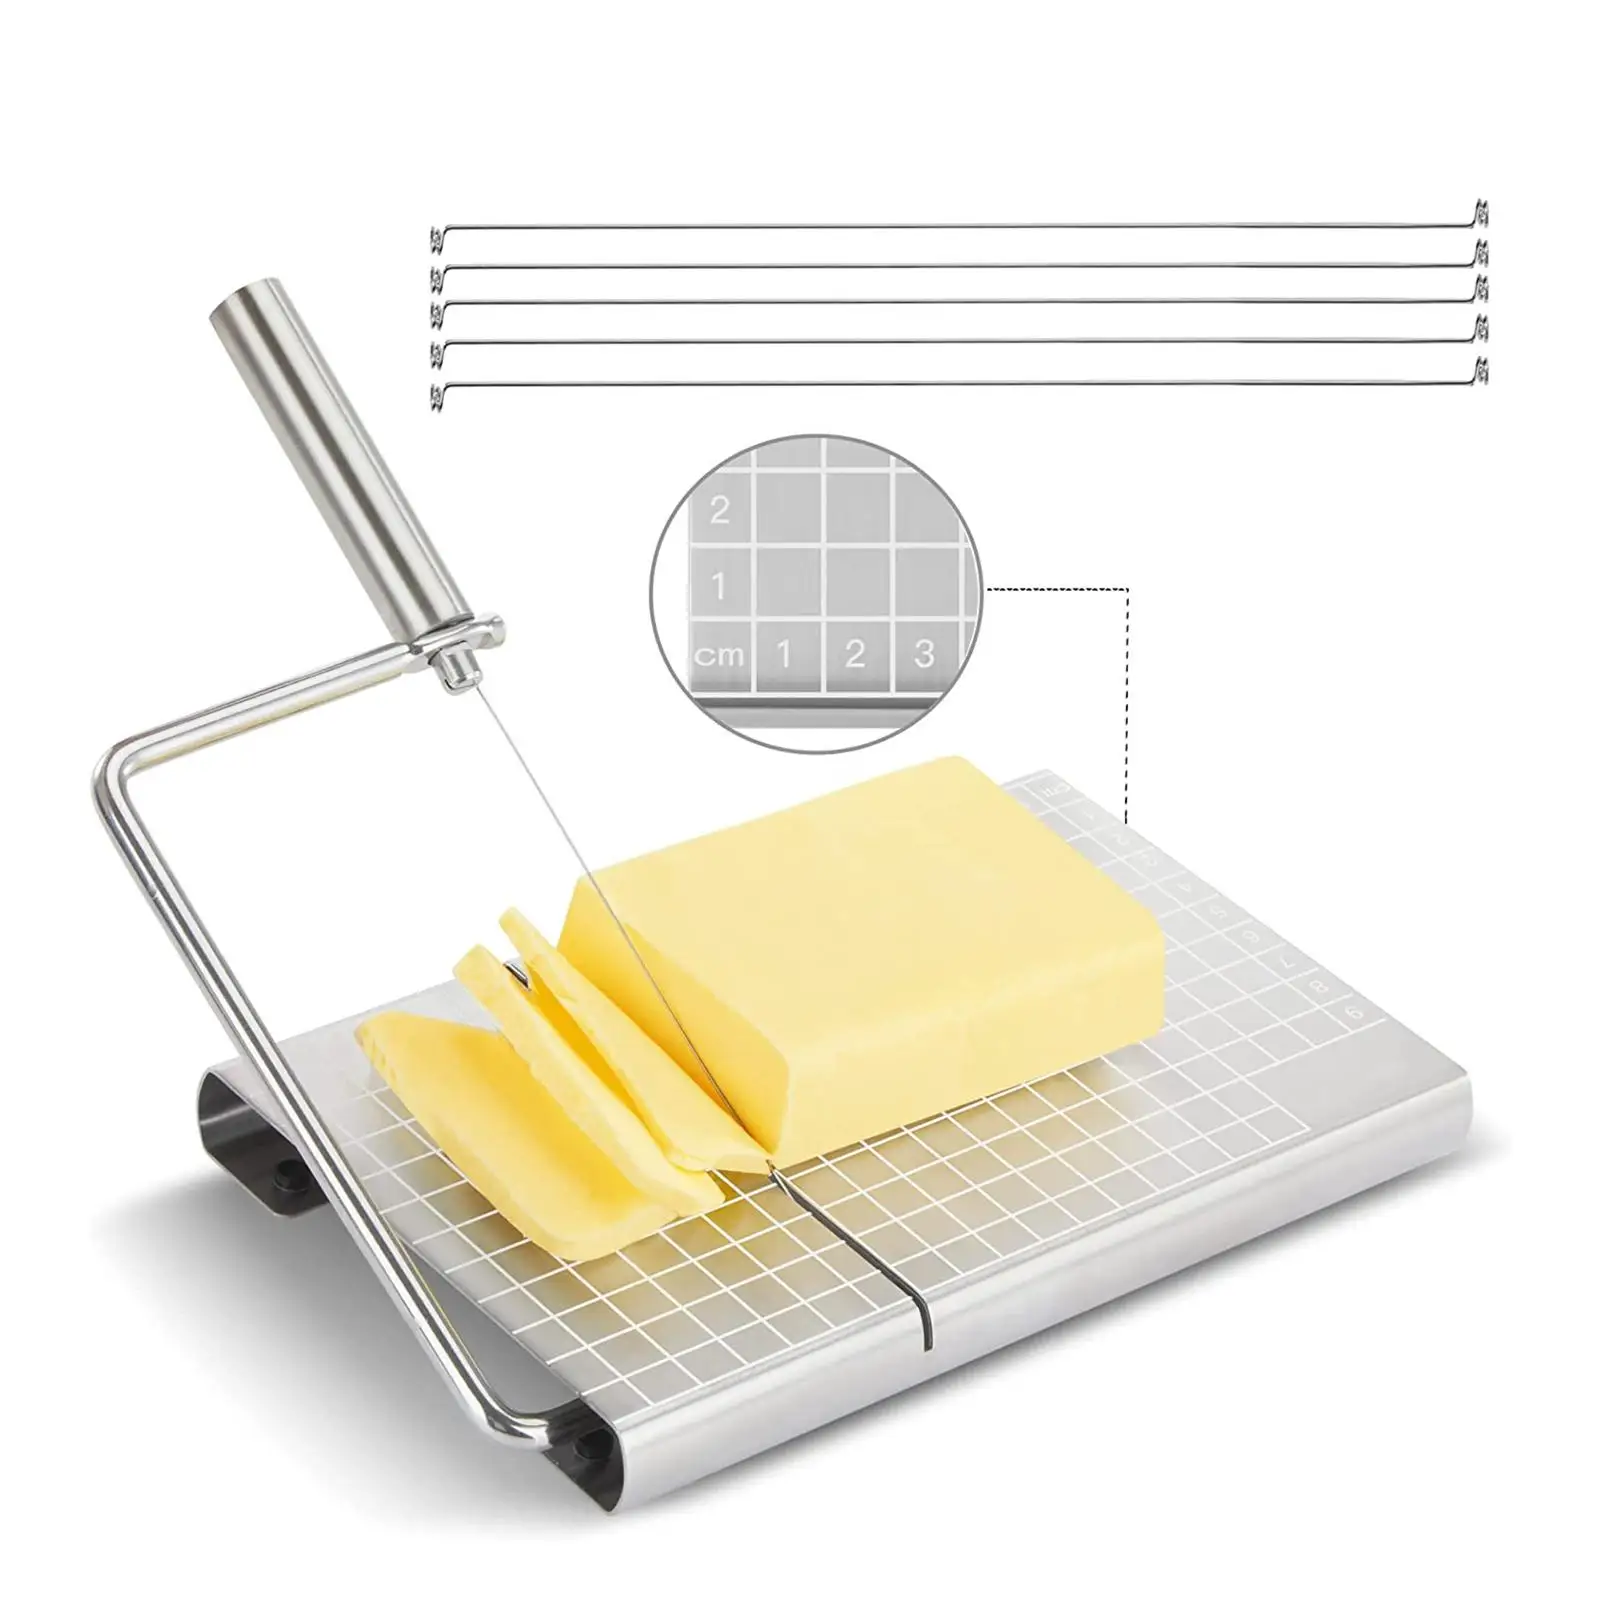 Cheese Slicer Replacement Wires Cheese Block Slicer for Cafe Restaurant Bar